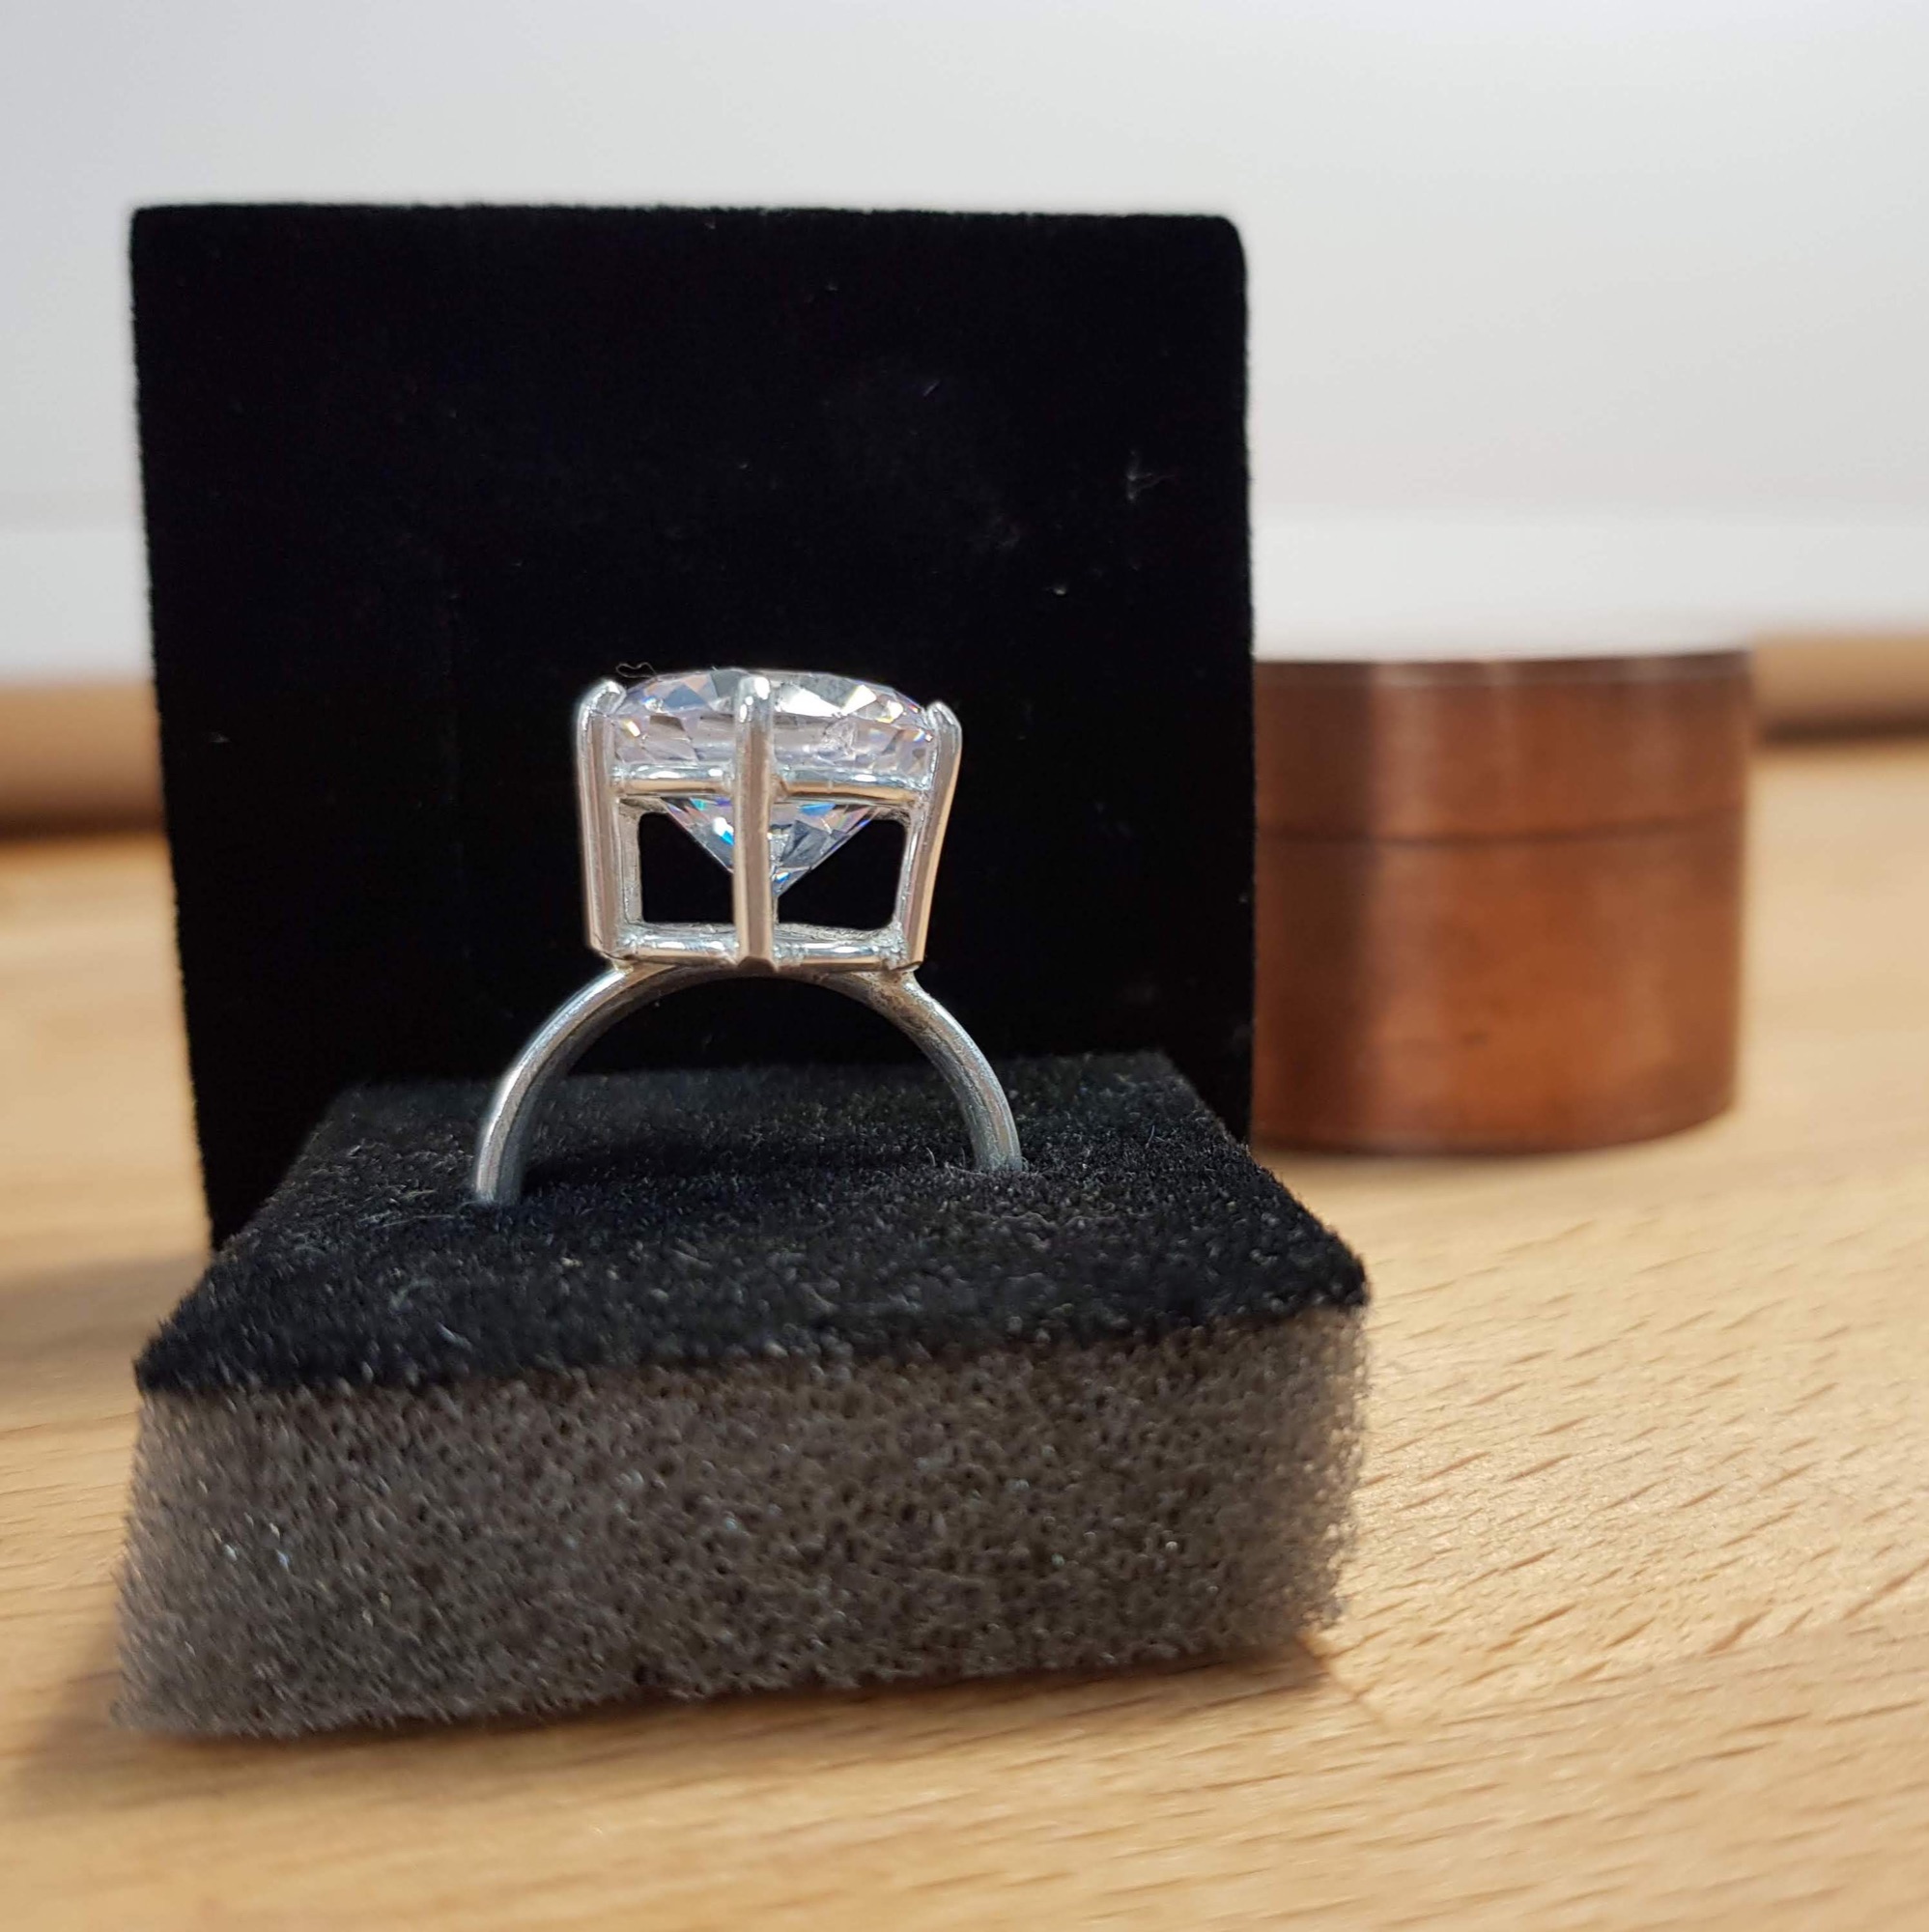 Learn how to make a stone set ring